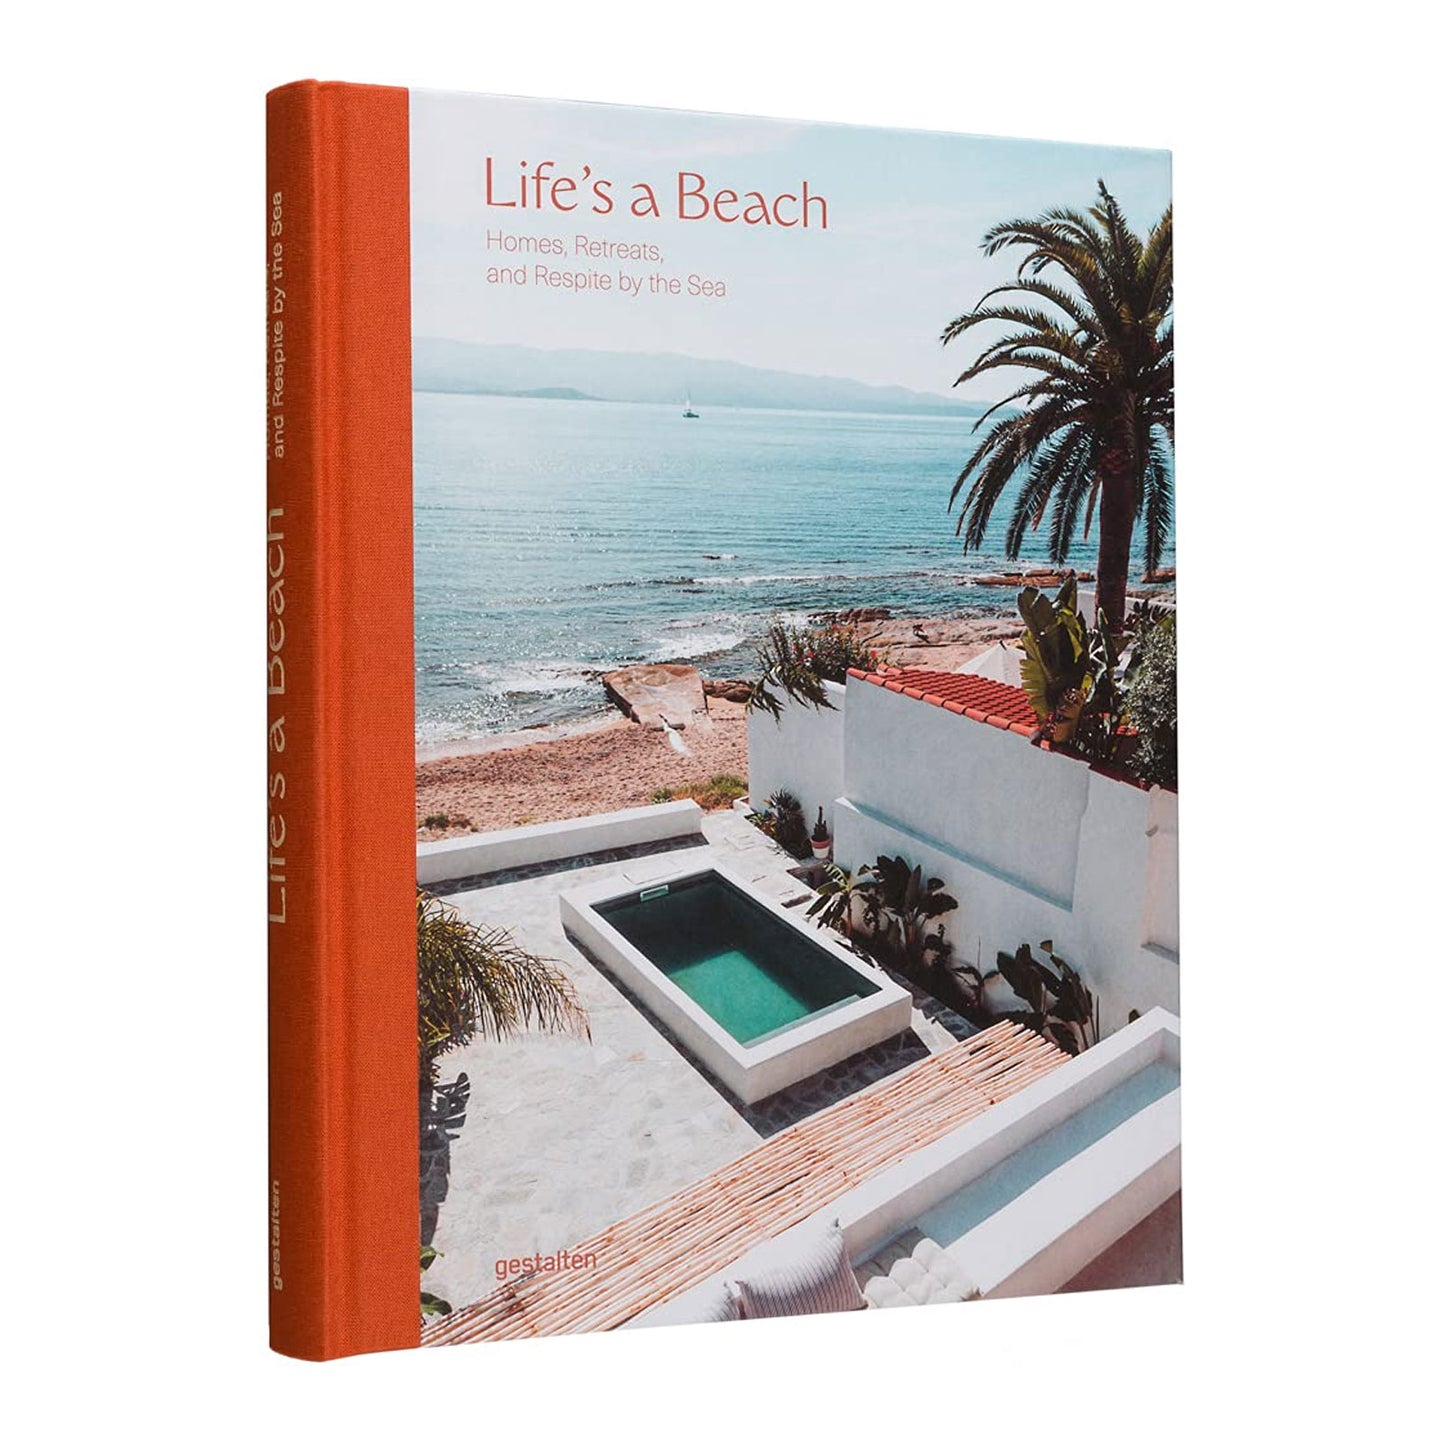 Life's a Beach: Homes, Retreats, and Respite by the Sea